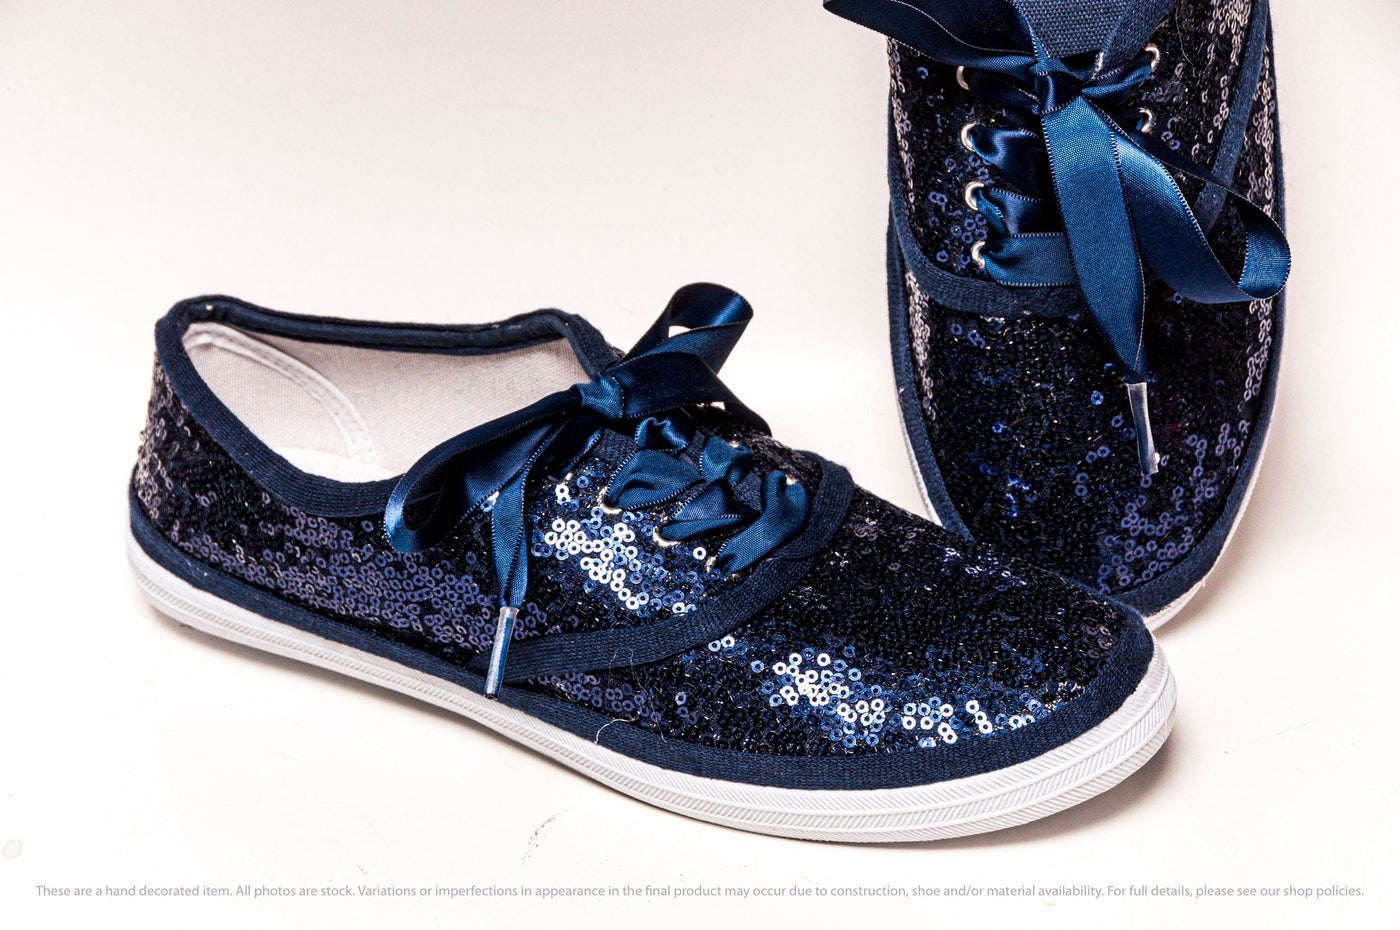 Wedding Shoes,  Navy Blue Sequin Sneakers with Satin Ribbon Laces